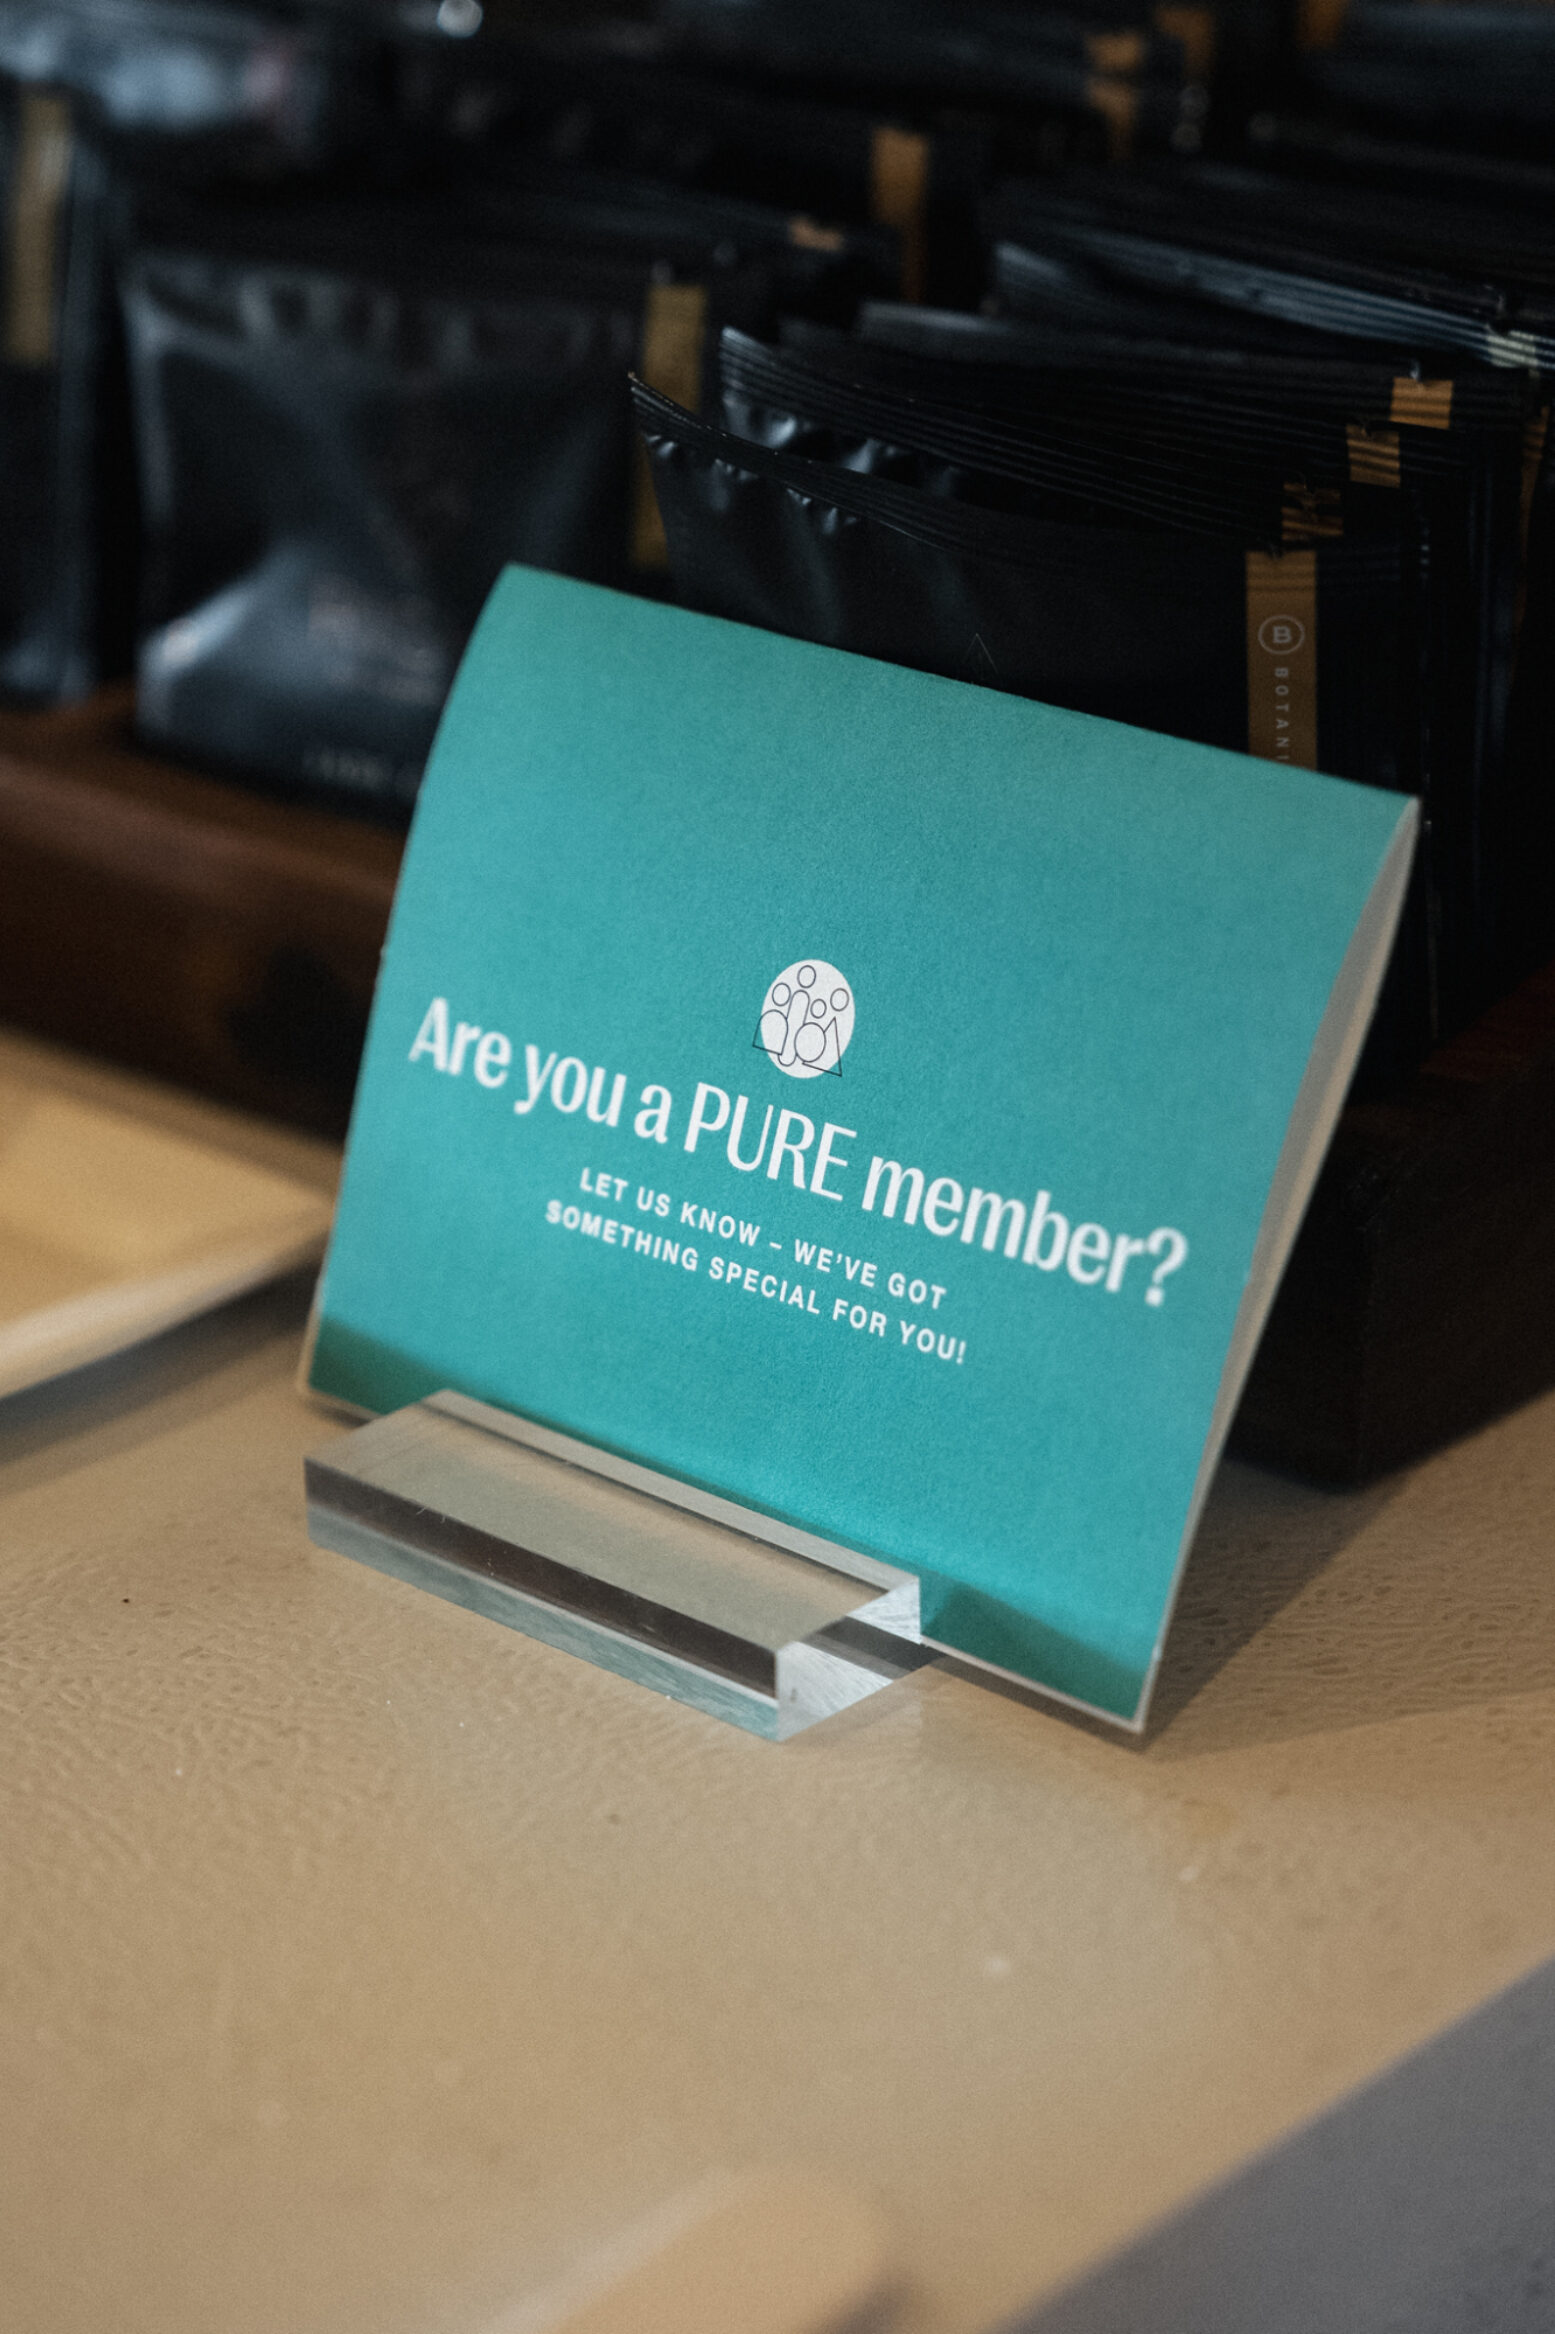 PURE members were invited to private events throughout the weekend.